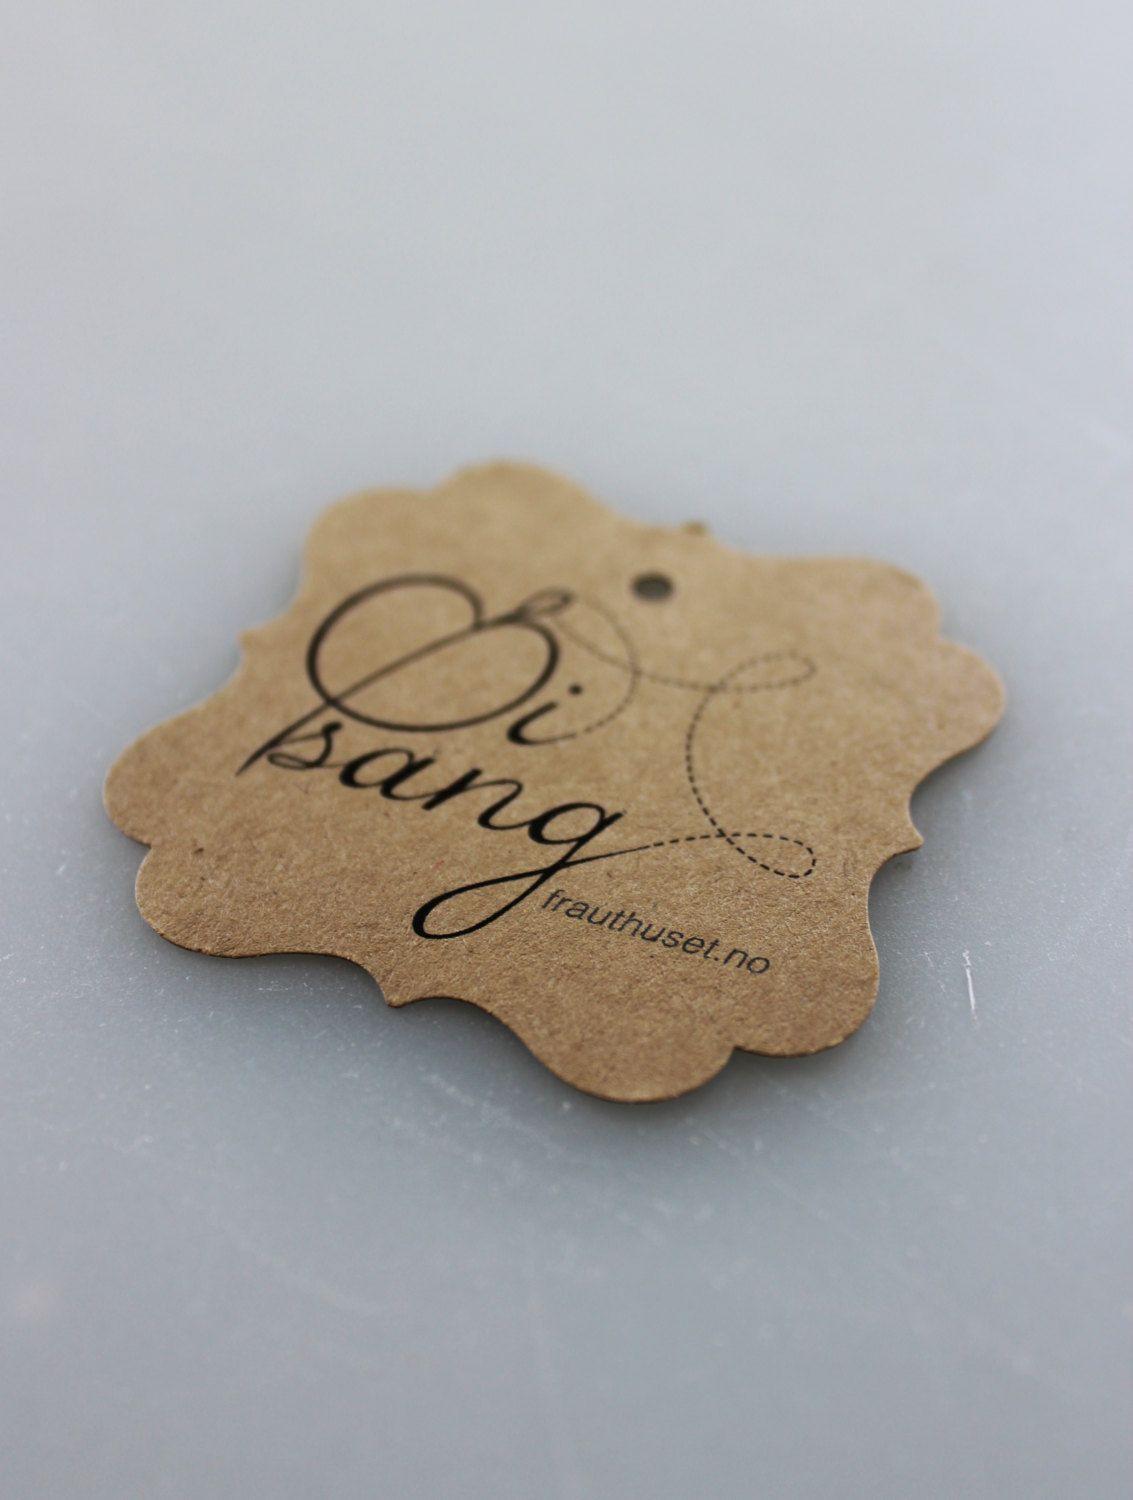 Merchandise Tags with Logo - Merchandise Swing Tags Customized with Your Logo Handmade Items